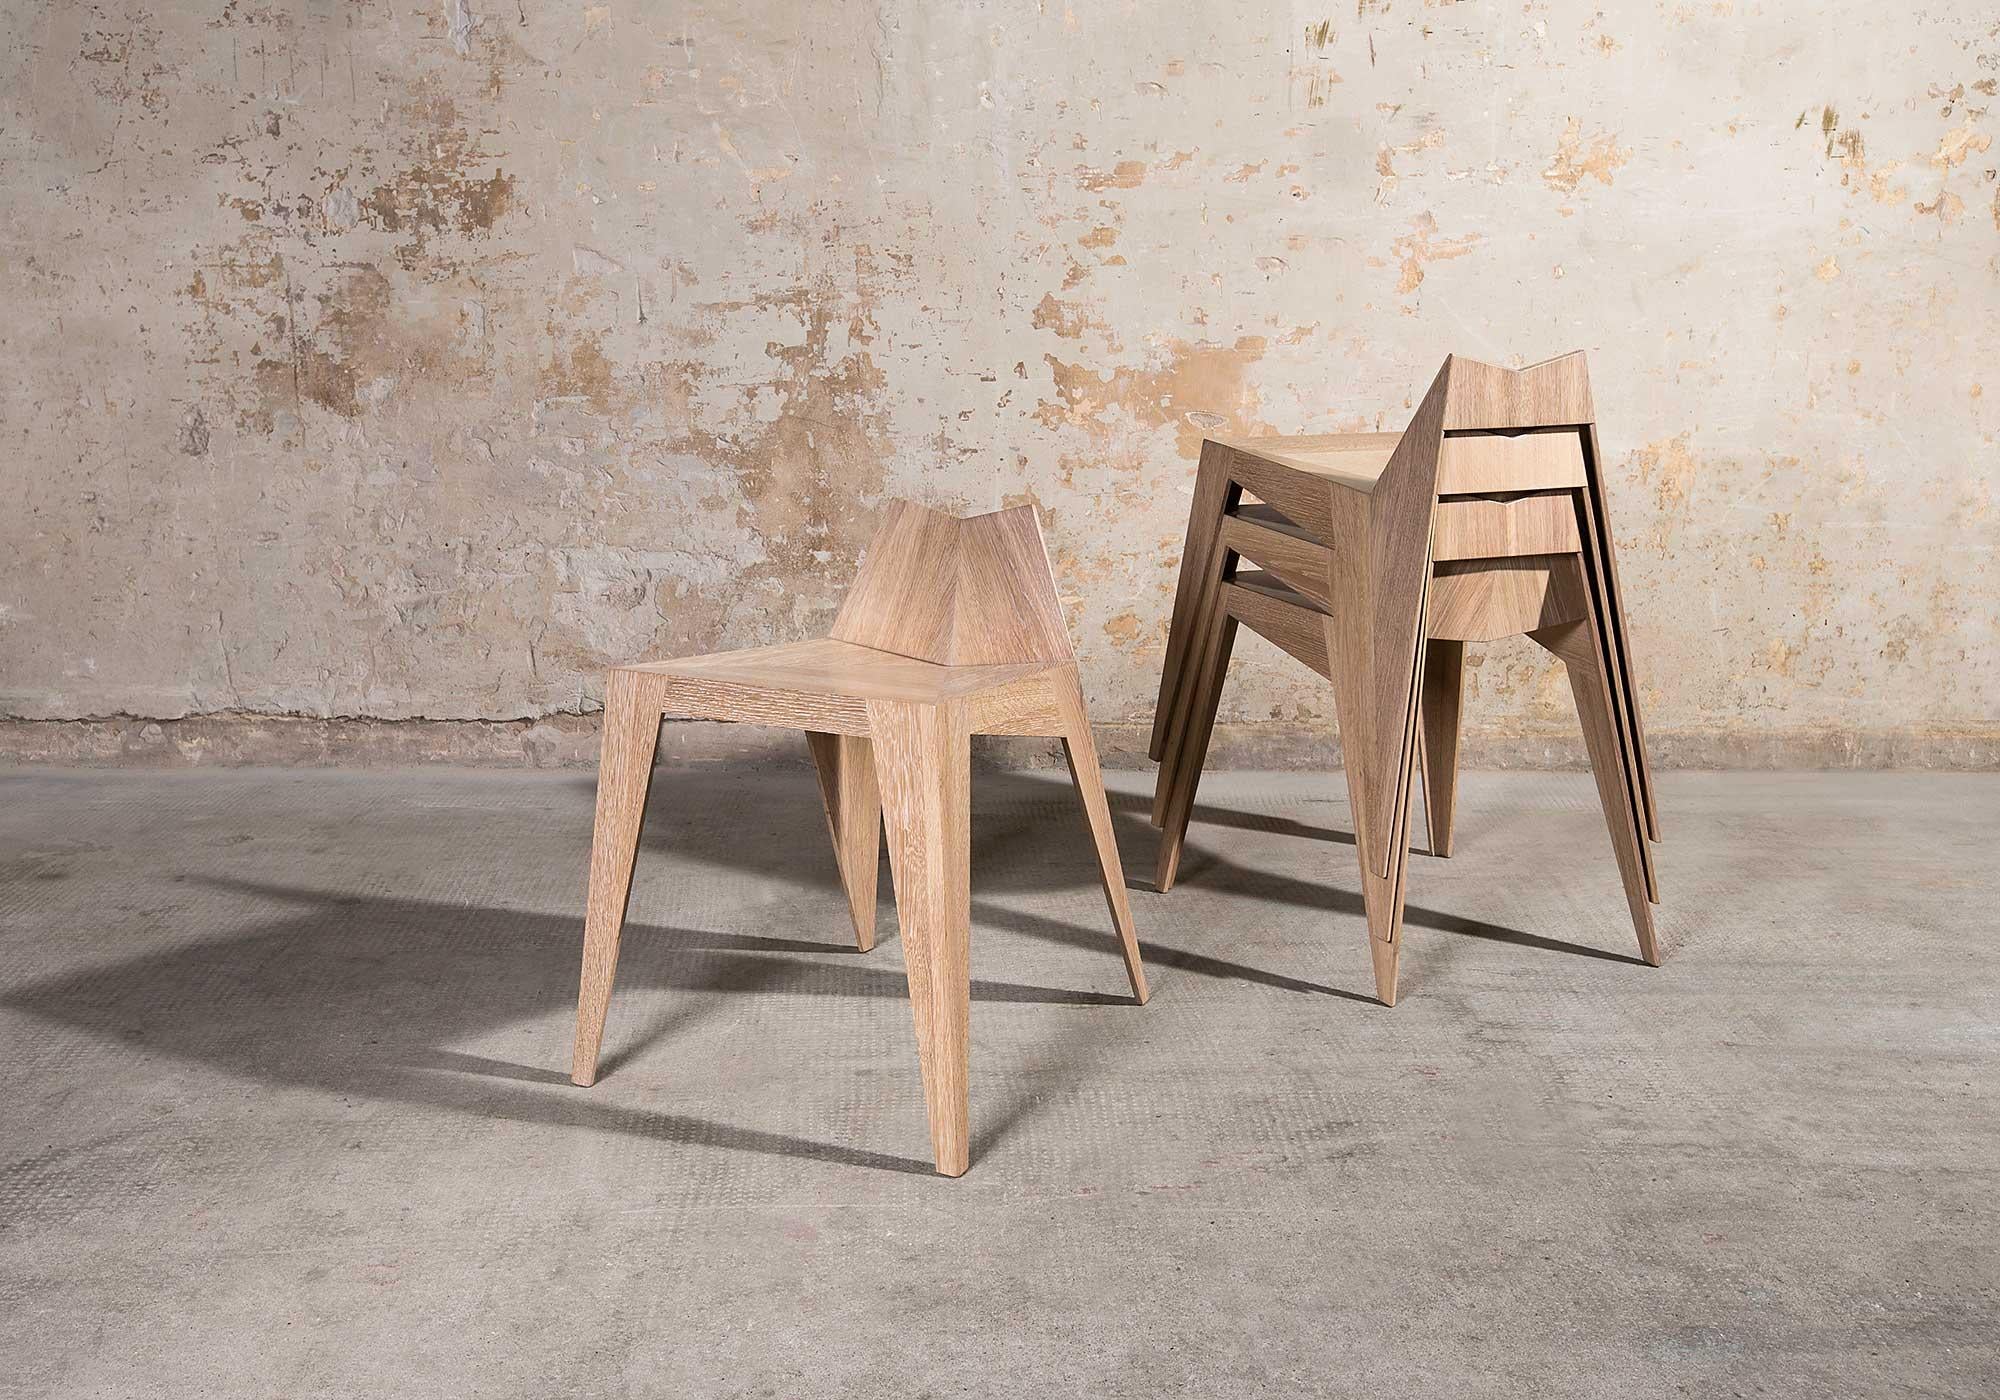 Stocker chair stool by Matthias Scherzinger
Dimensions: W 48 x L 54 x H 61.5 cm
Materials: Solid wood oak

The stocker is a fusion between a stool and a chair.
The light stackable wooden seats are suitable for private and semi-official